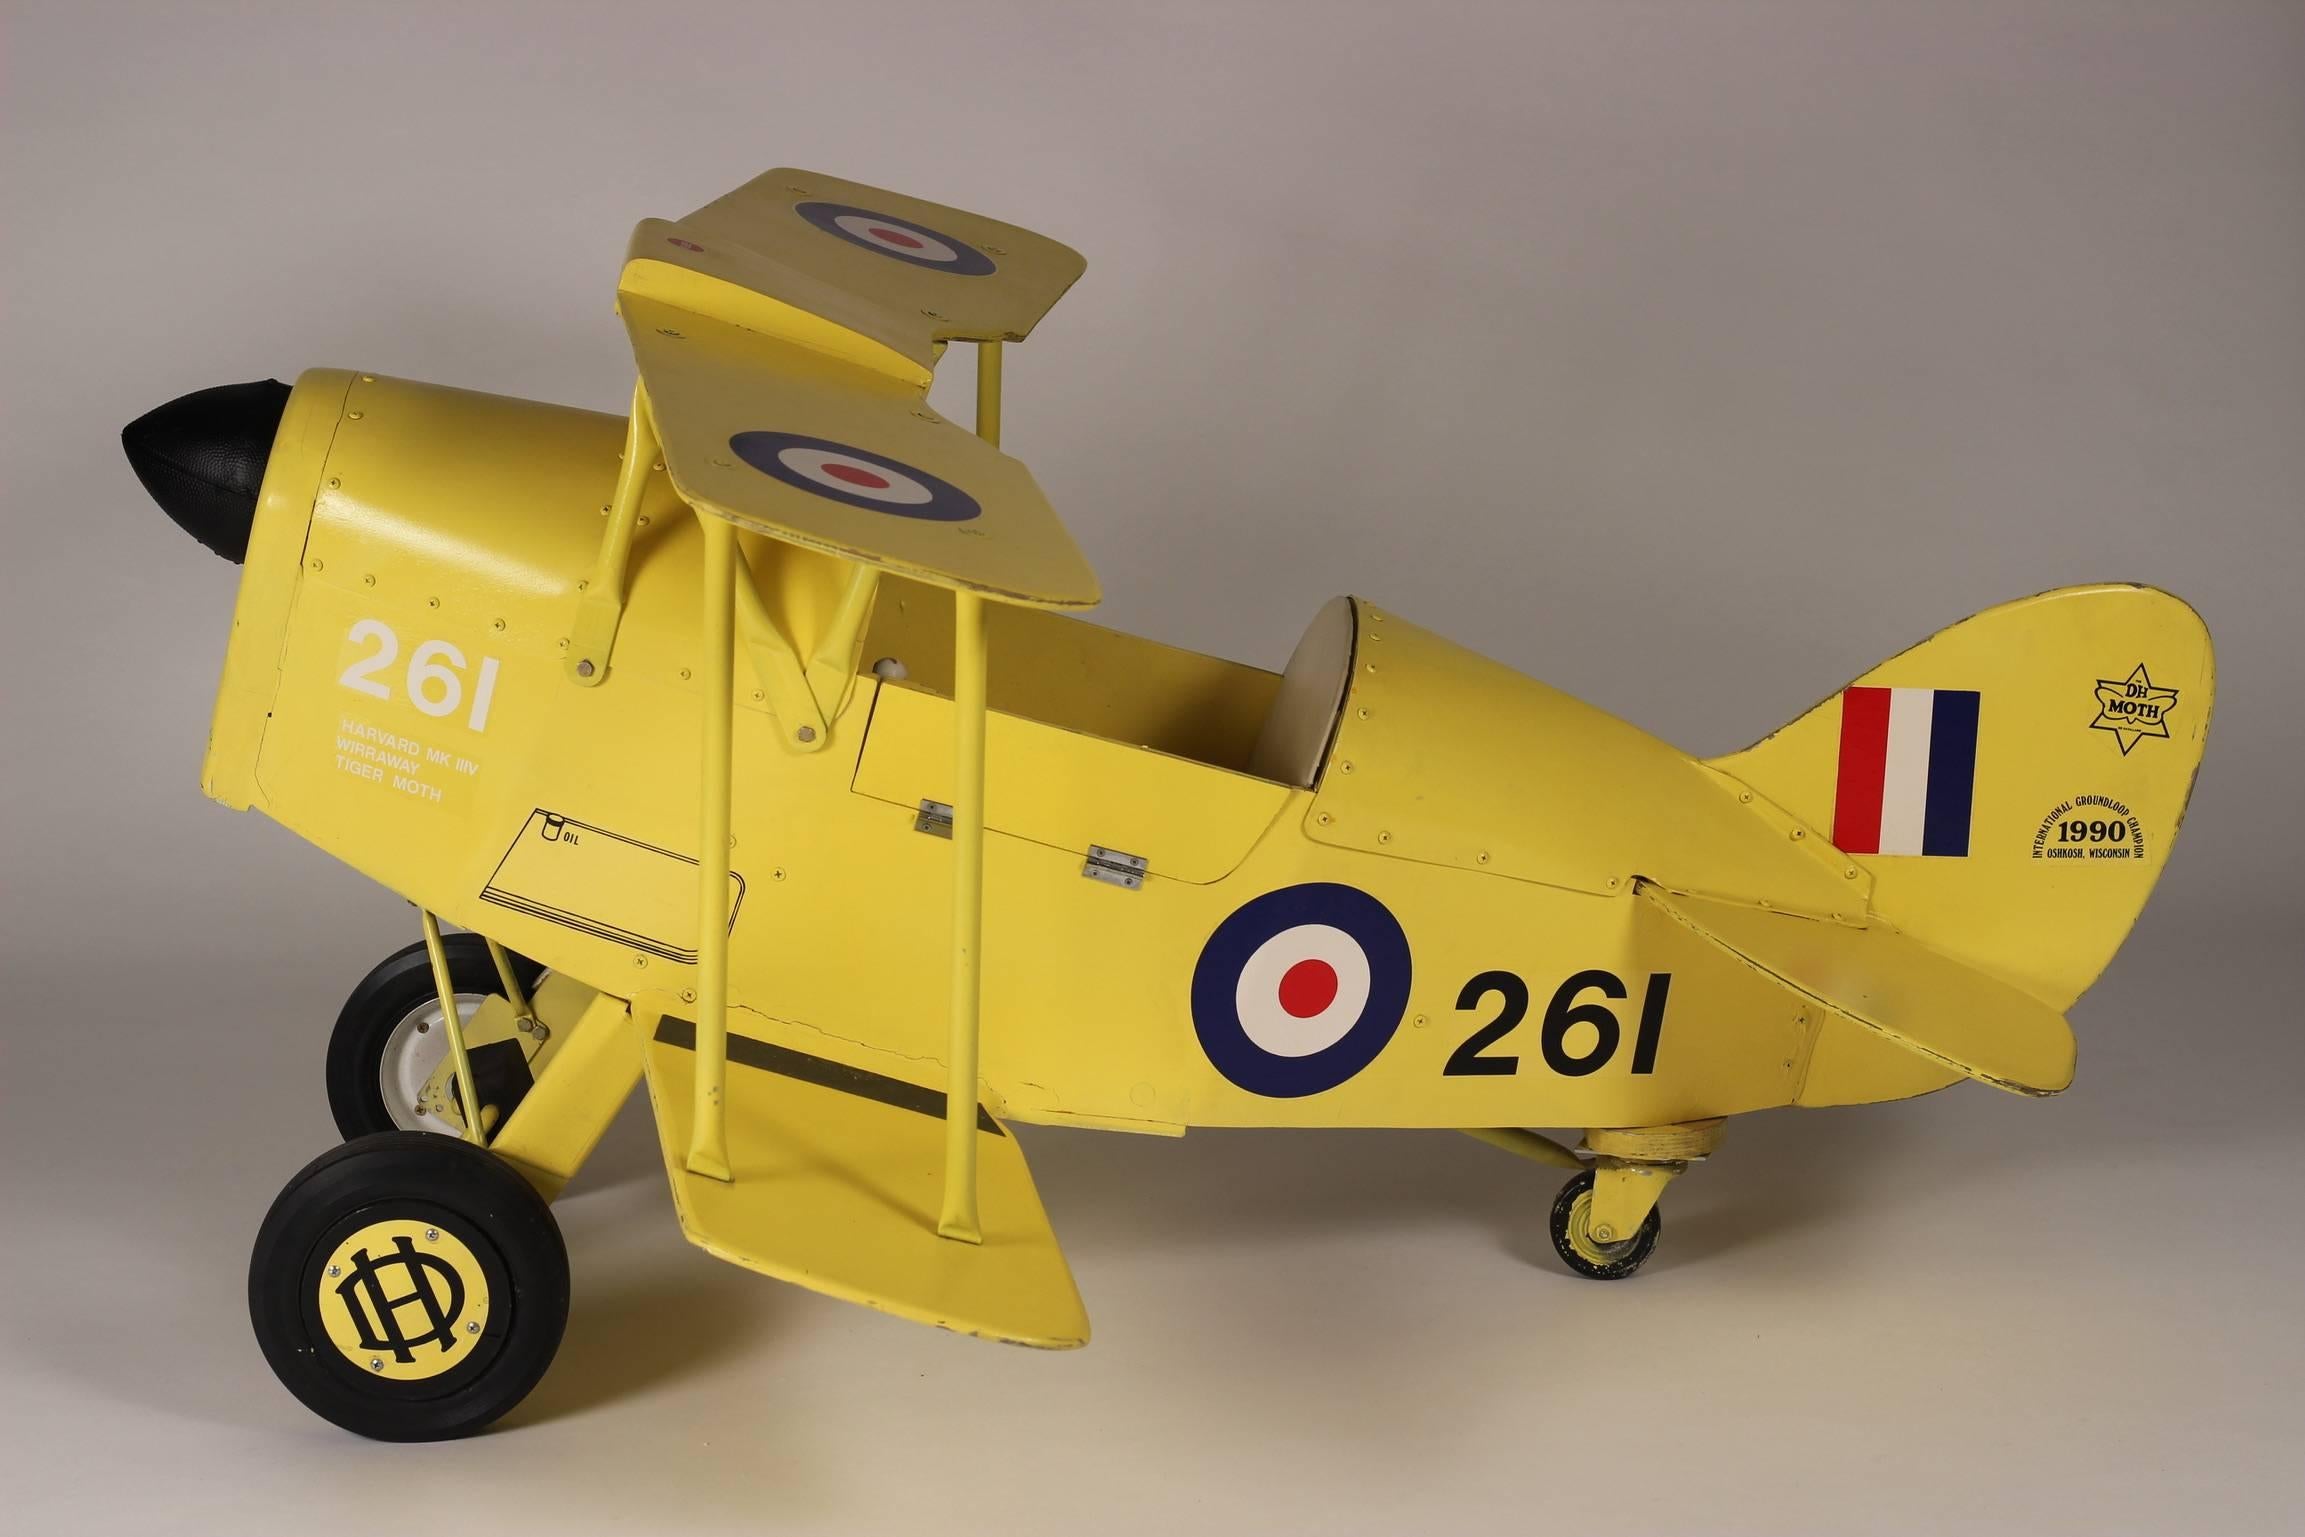 What can we say about this wonderful Vintage yellow Bi Plane pedal Car. Well, we only wished we had one as a child! Dating back to 1990 this handmade Bi plane can be steered and pedalled in any direction to your child’s content.
Flying jacket,